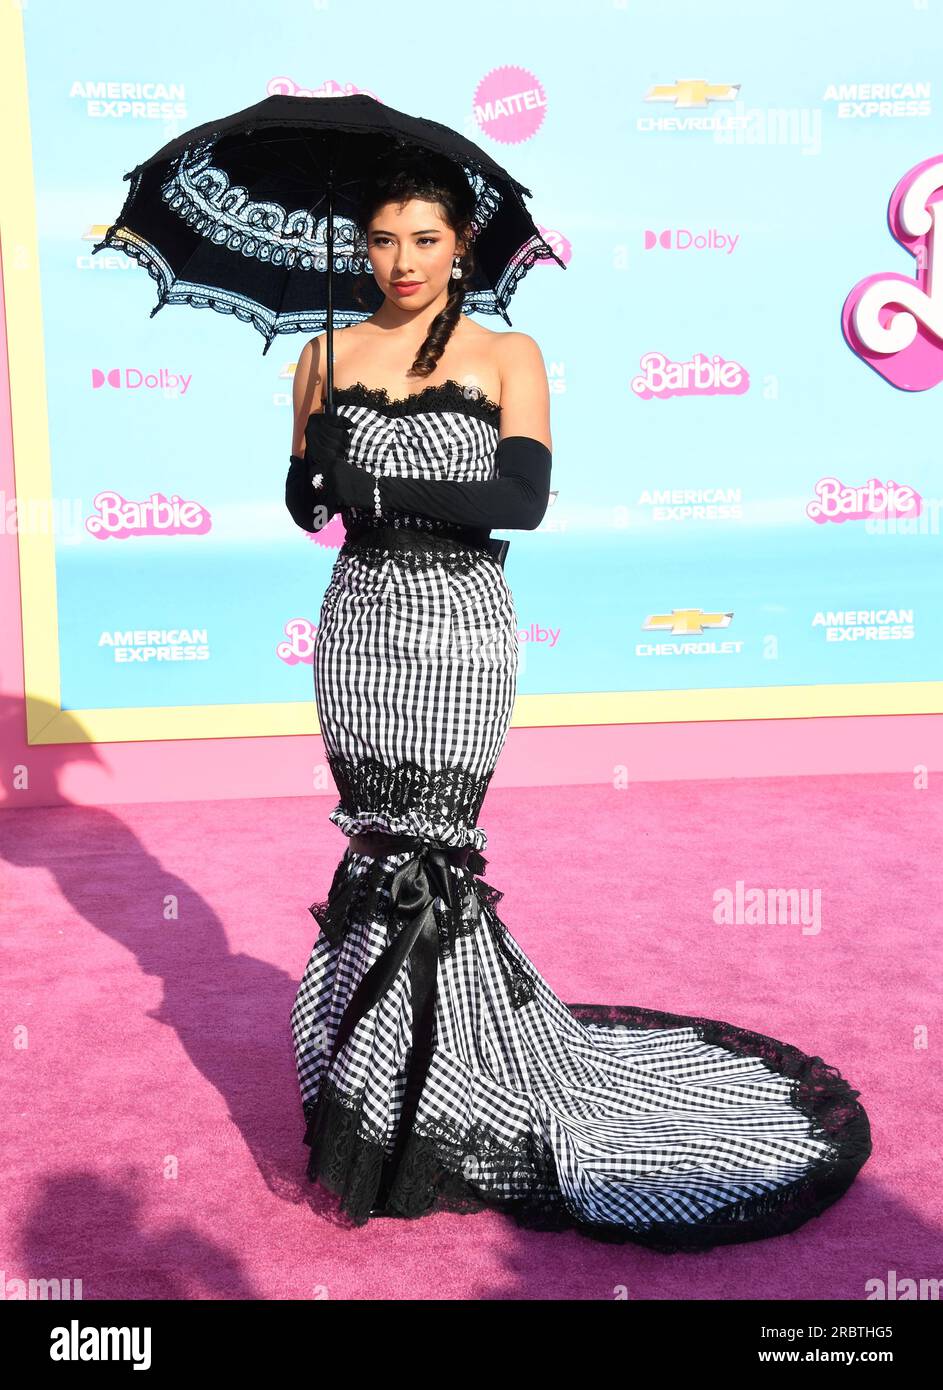 Los Angeles, California, USA. 09th July, 2023. Xochitl Gomez attends the World Premiere of 'Barbie' at the Shrine Auditorium and Expo Hall on July 09, 2023 in Los Angeles, California. Credit: Jeffrey Mayer/Jtm Photos/Media Punch/Alamy Live News Stock Photo